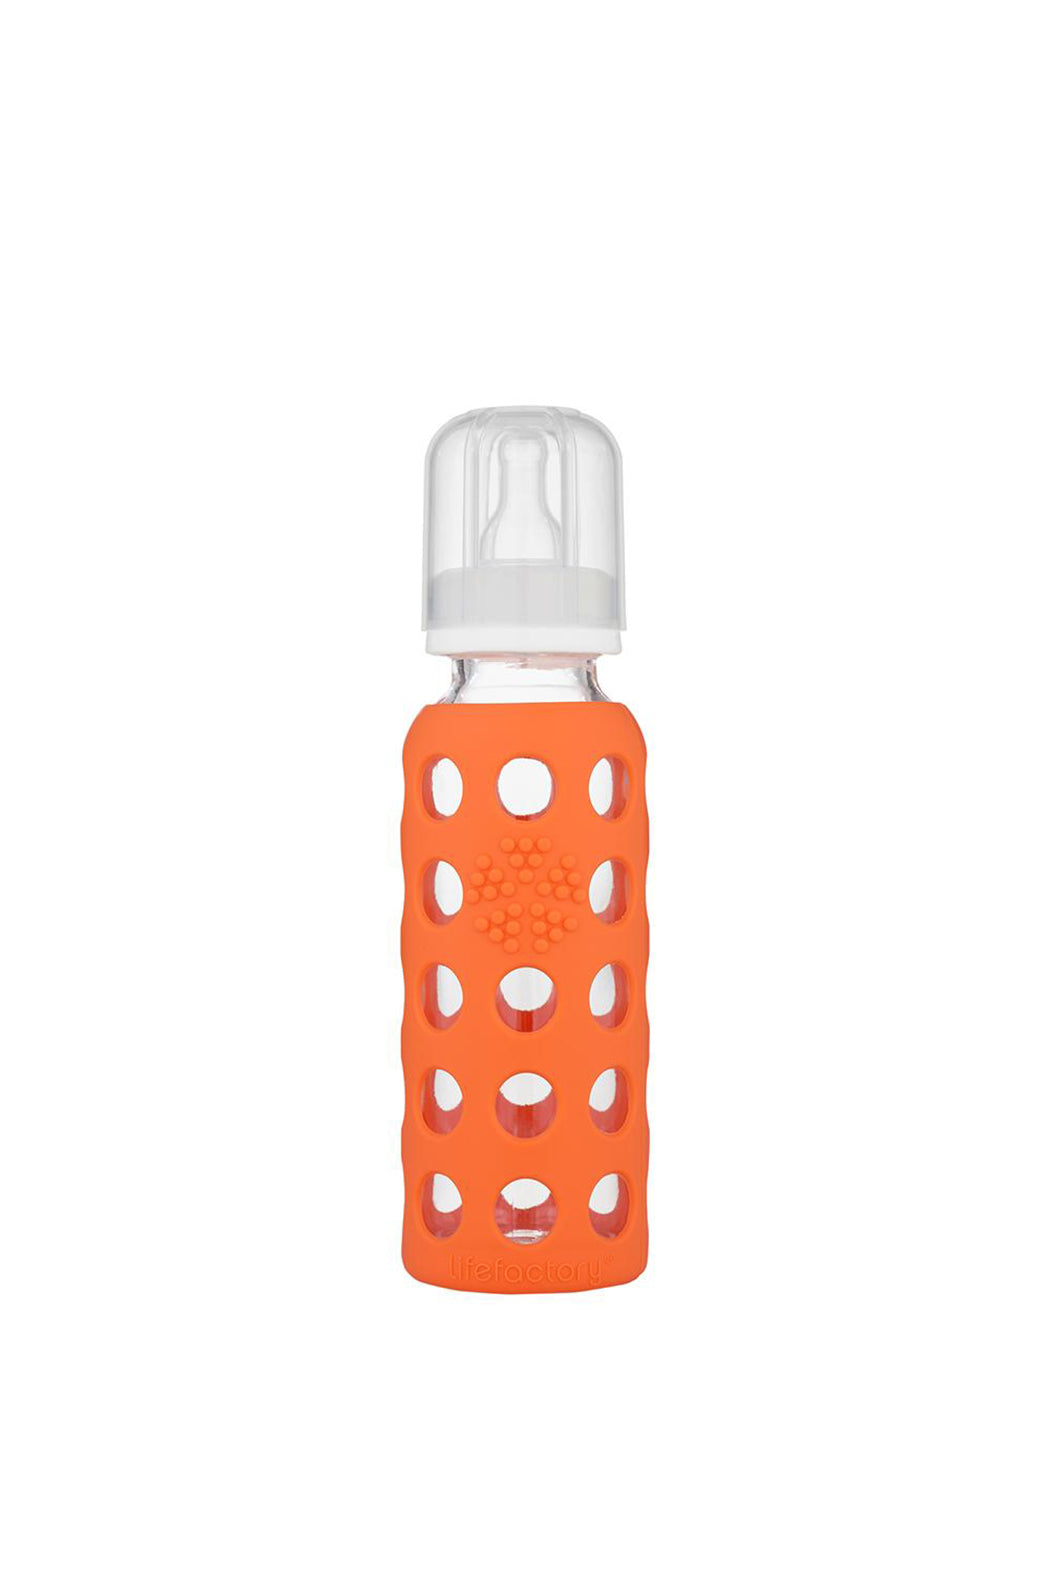 Lifefactory 9oz Glass Baby Bottle With Silicone Sleeve